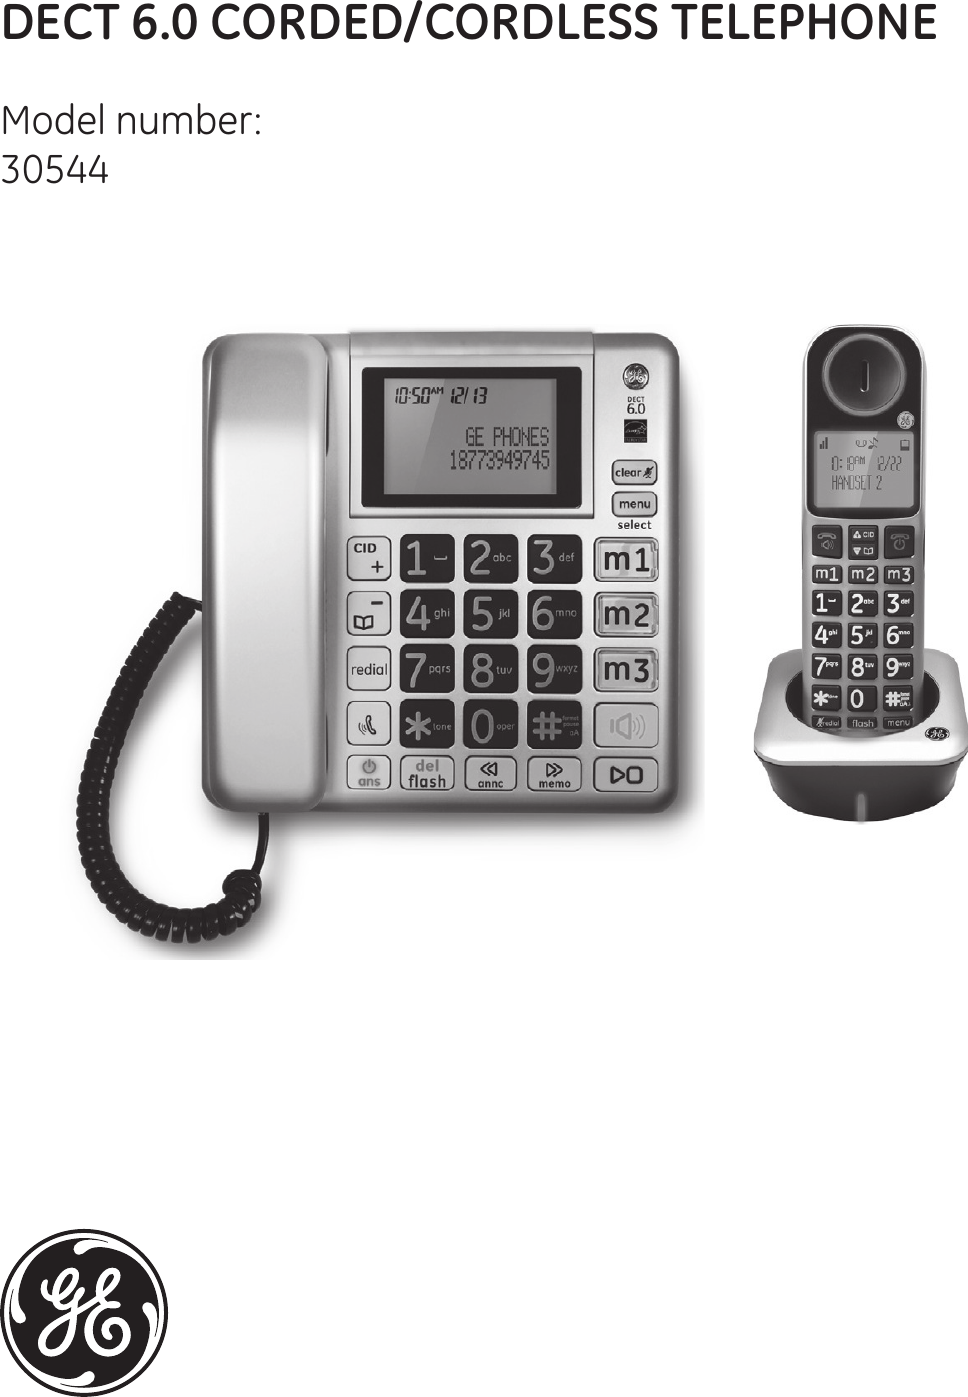 Model number: 30544DECT 6.0 CORDED/CORDLESS TELEPHONE